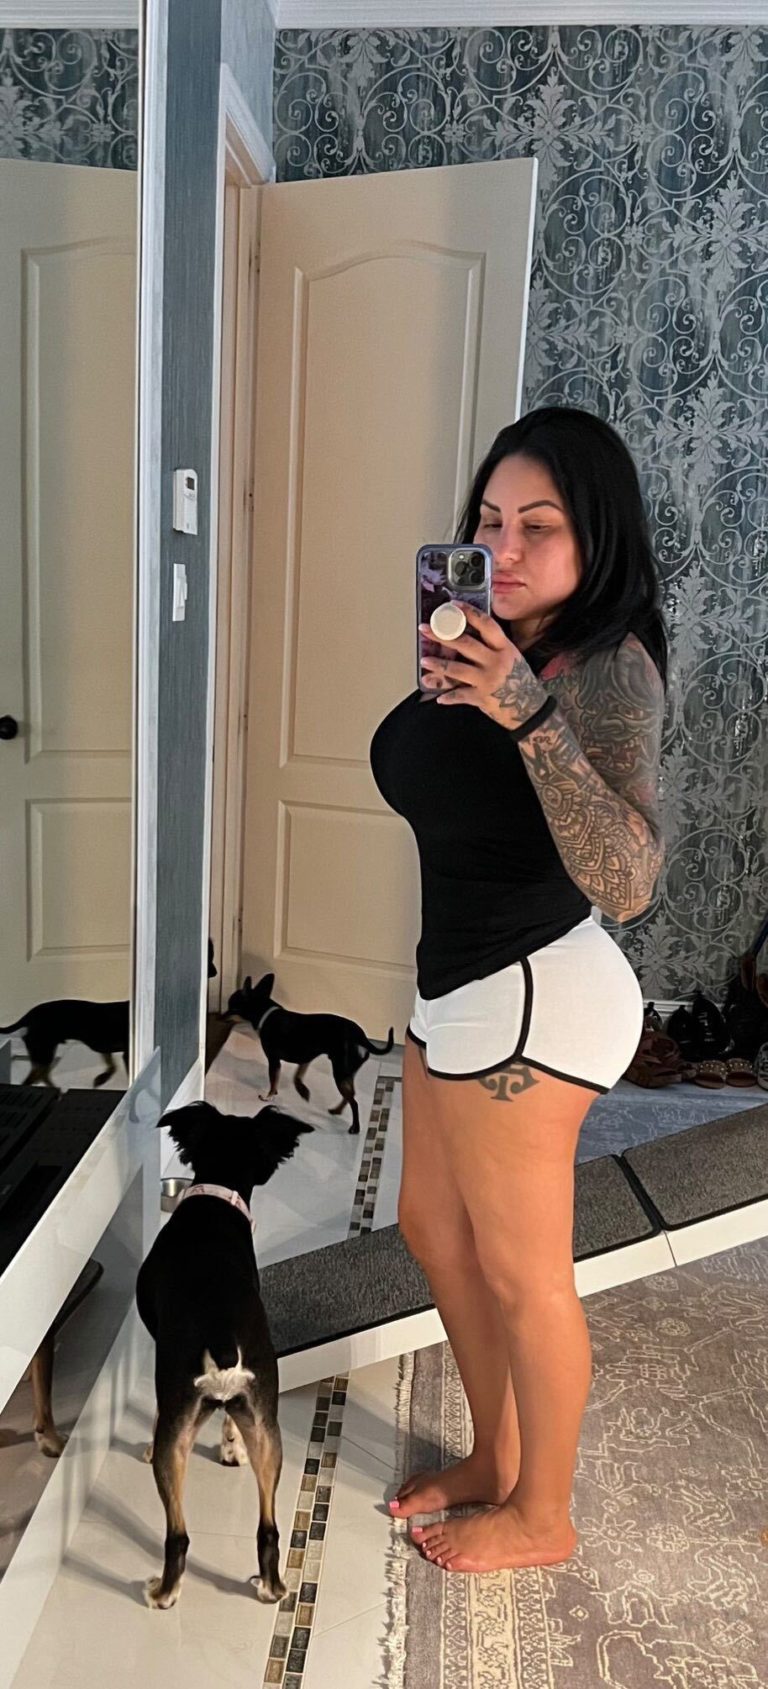 woman posing for selfie with dog